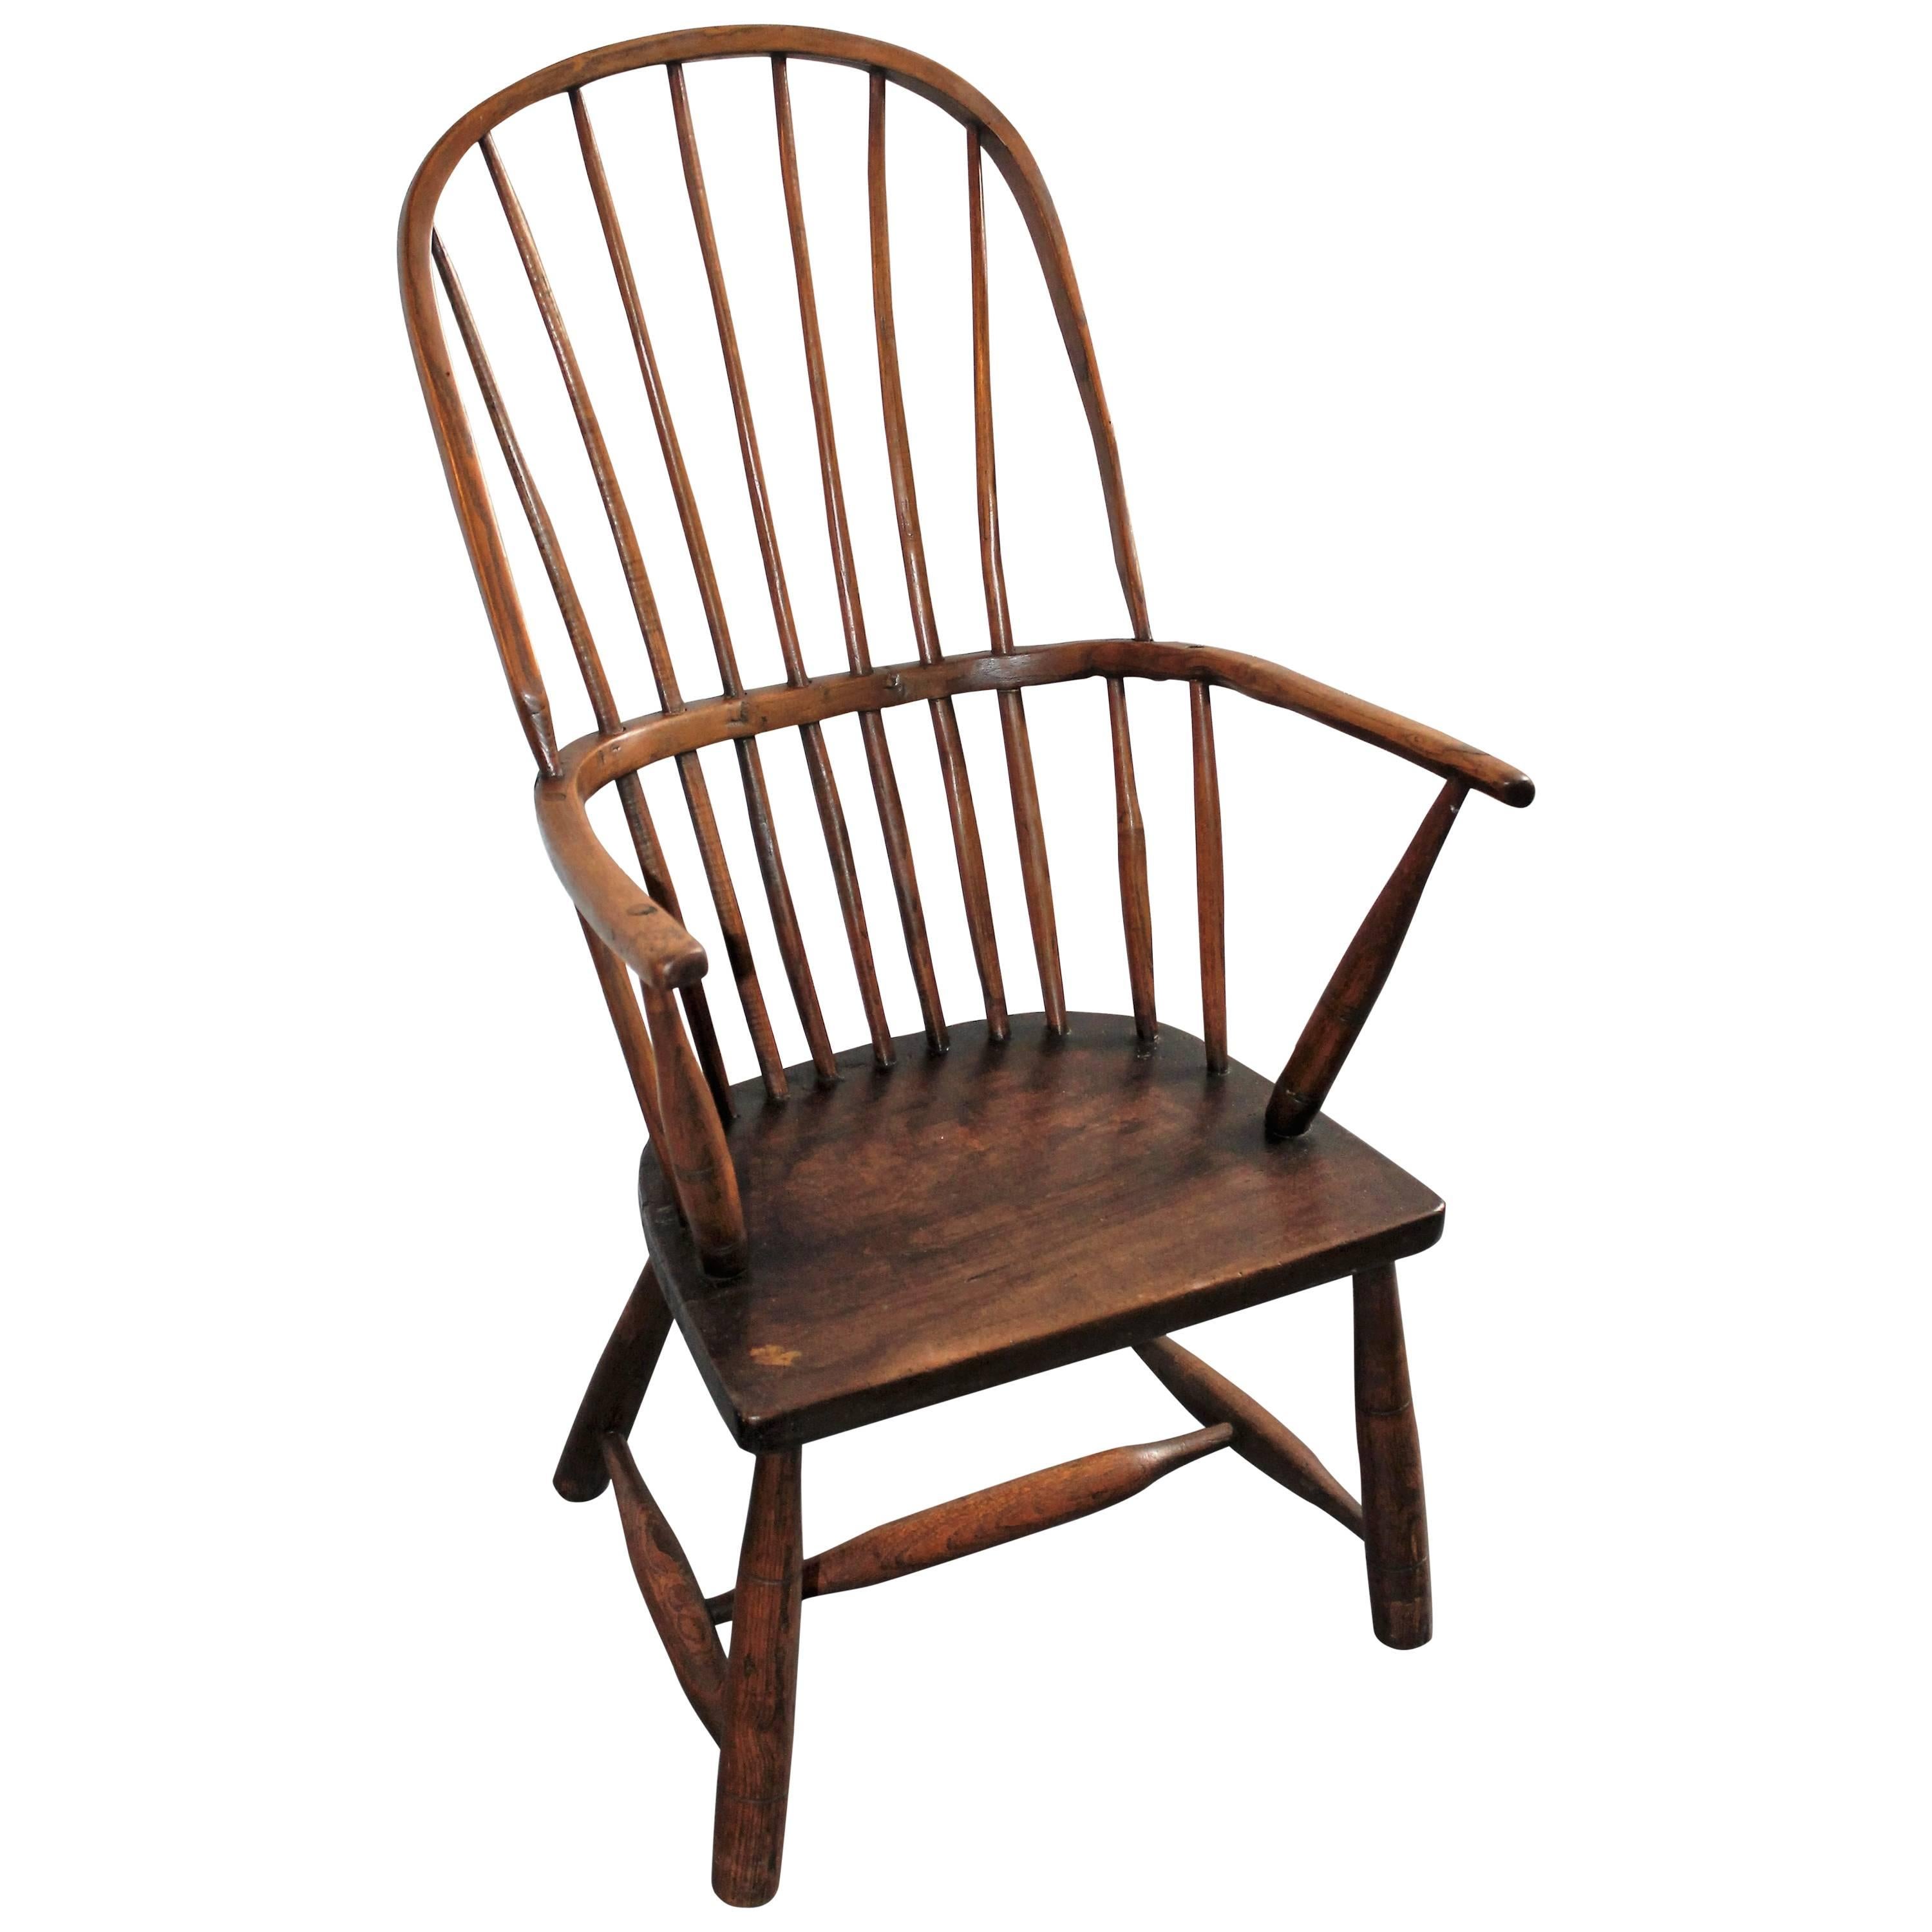 Early 19th Century English High Back Windsor Chair